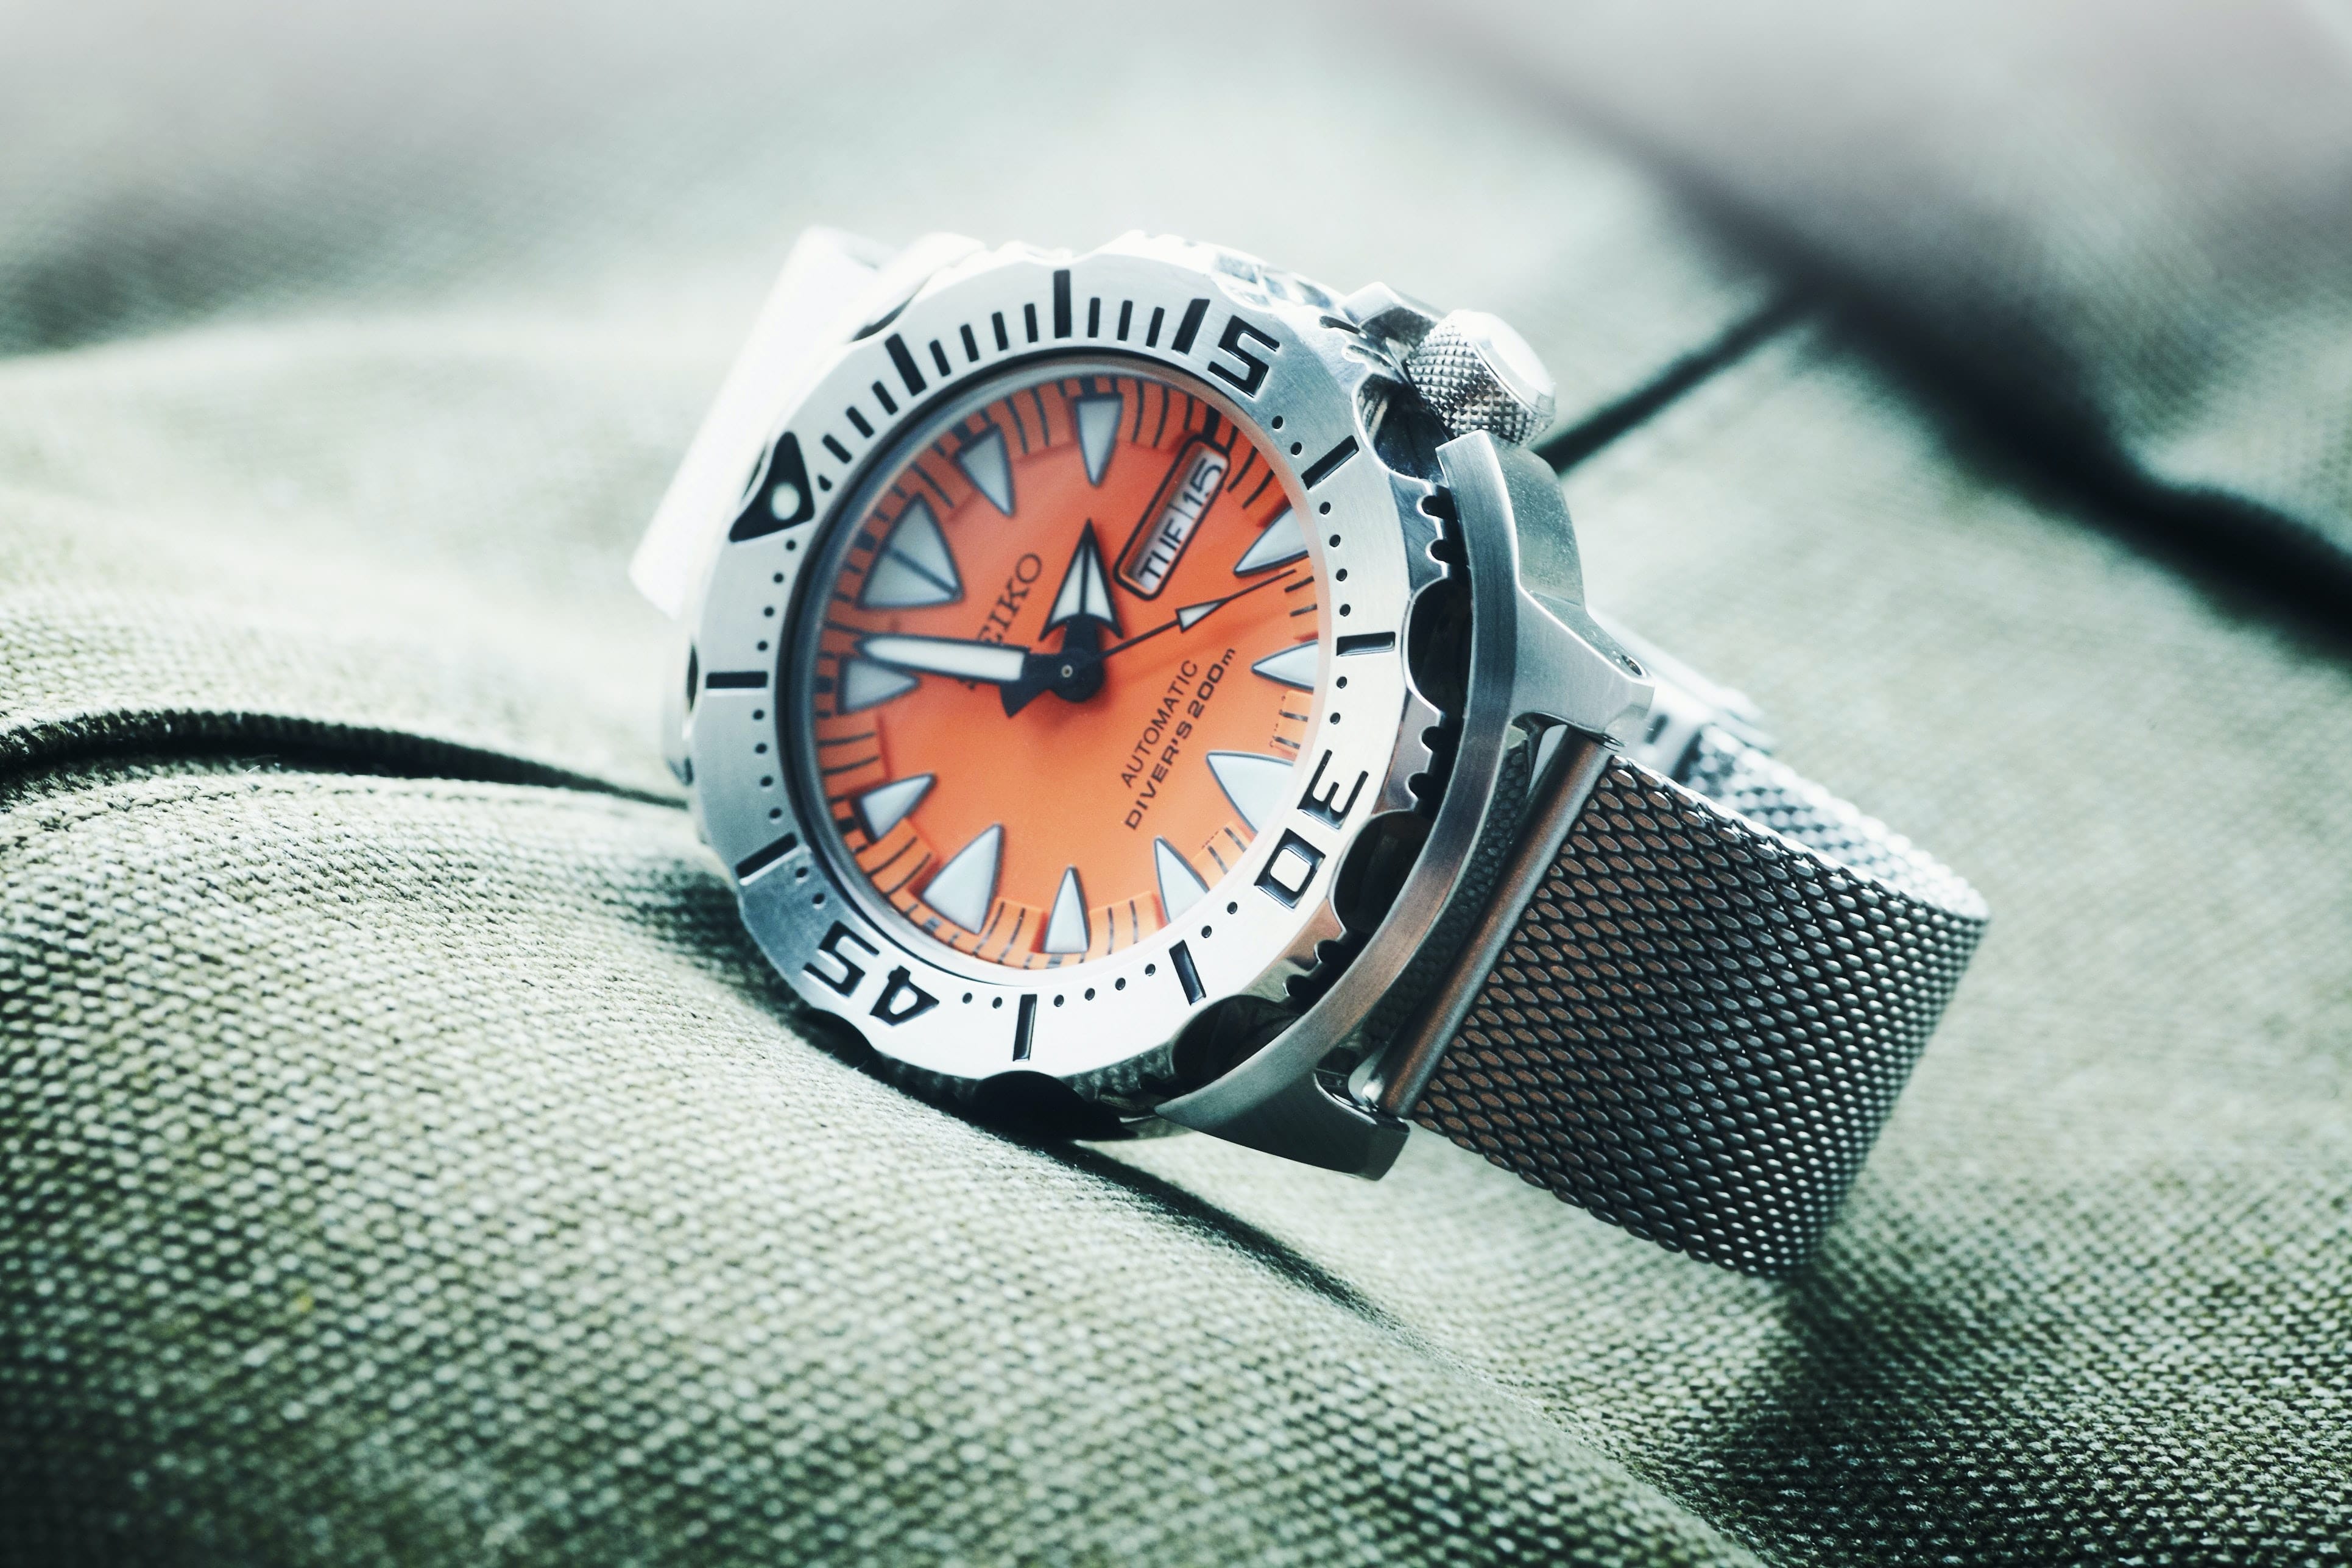  Image of a seiko dive watch 